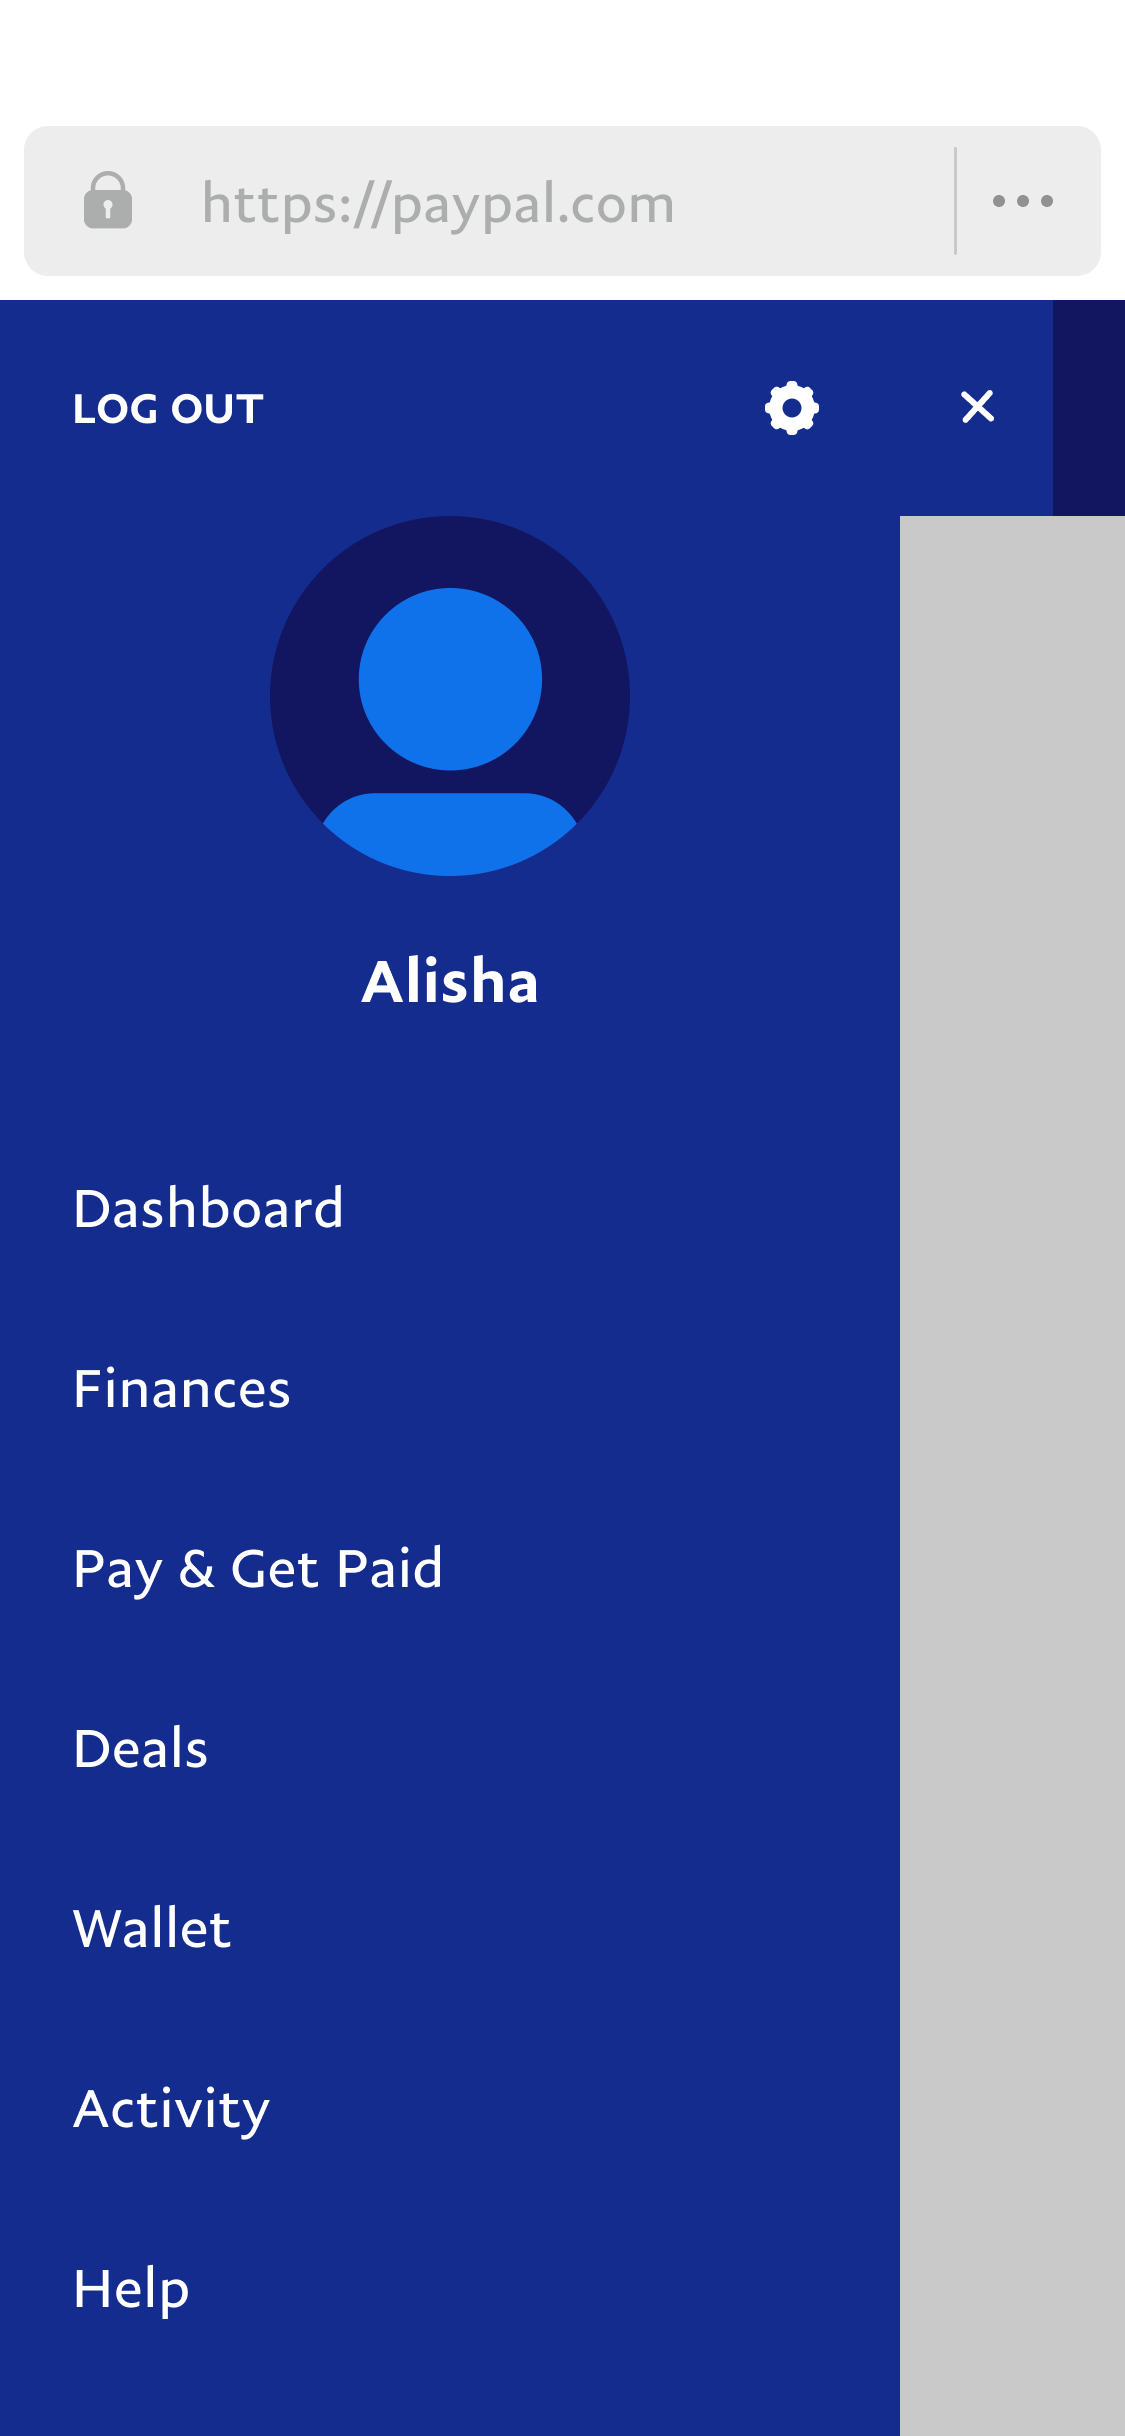 An illustration of the main menu in the PayPal app